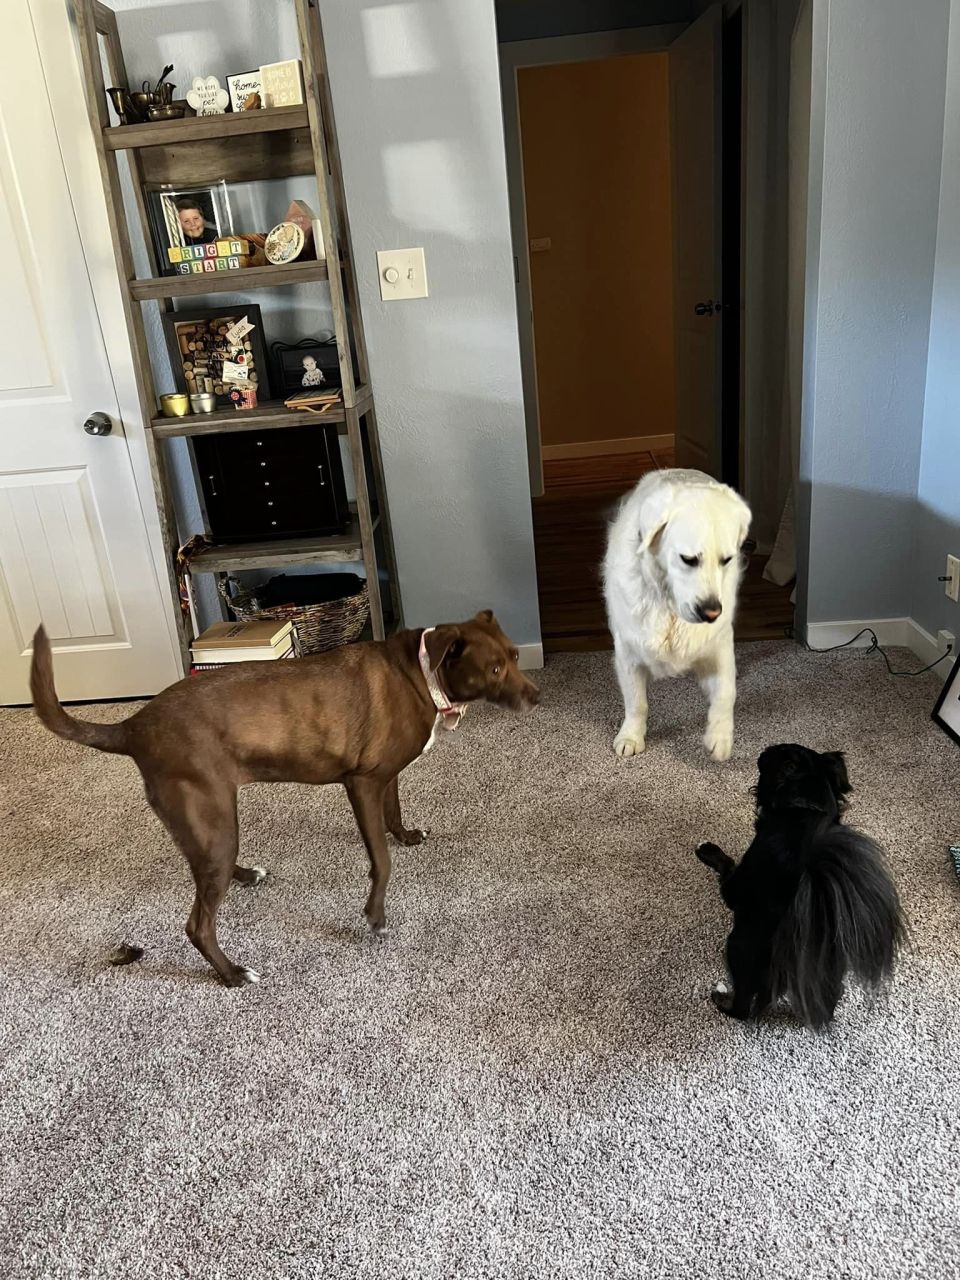 Toby and I recently moved to Boise, Idaho and he is already making friends!